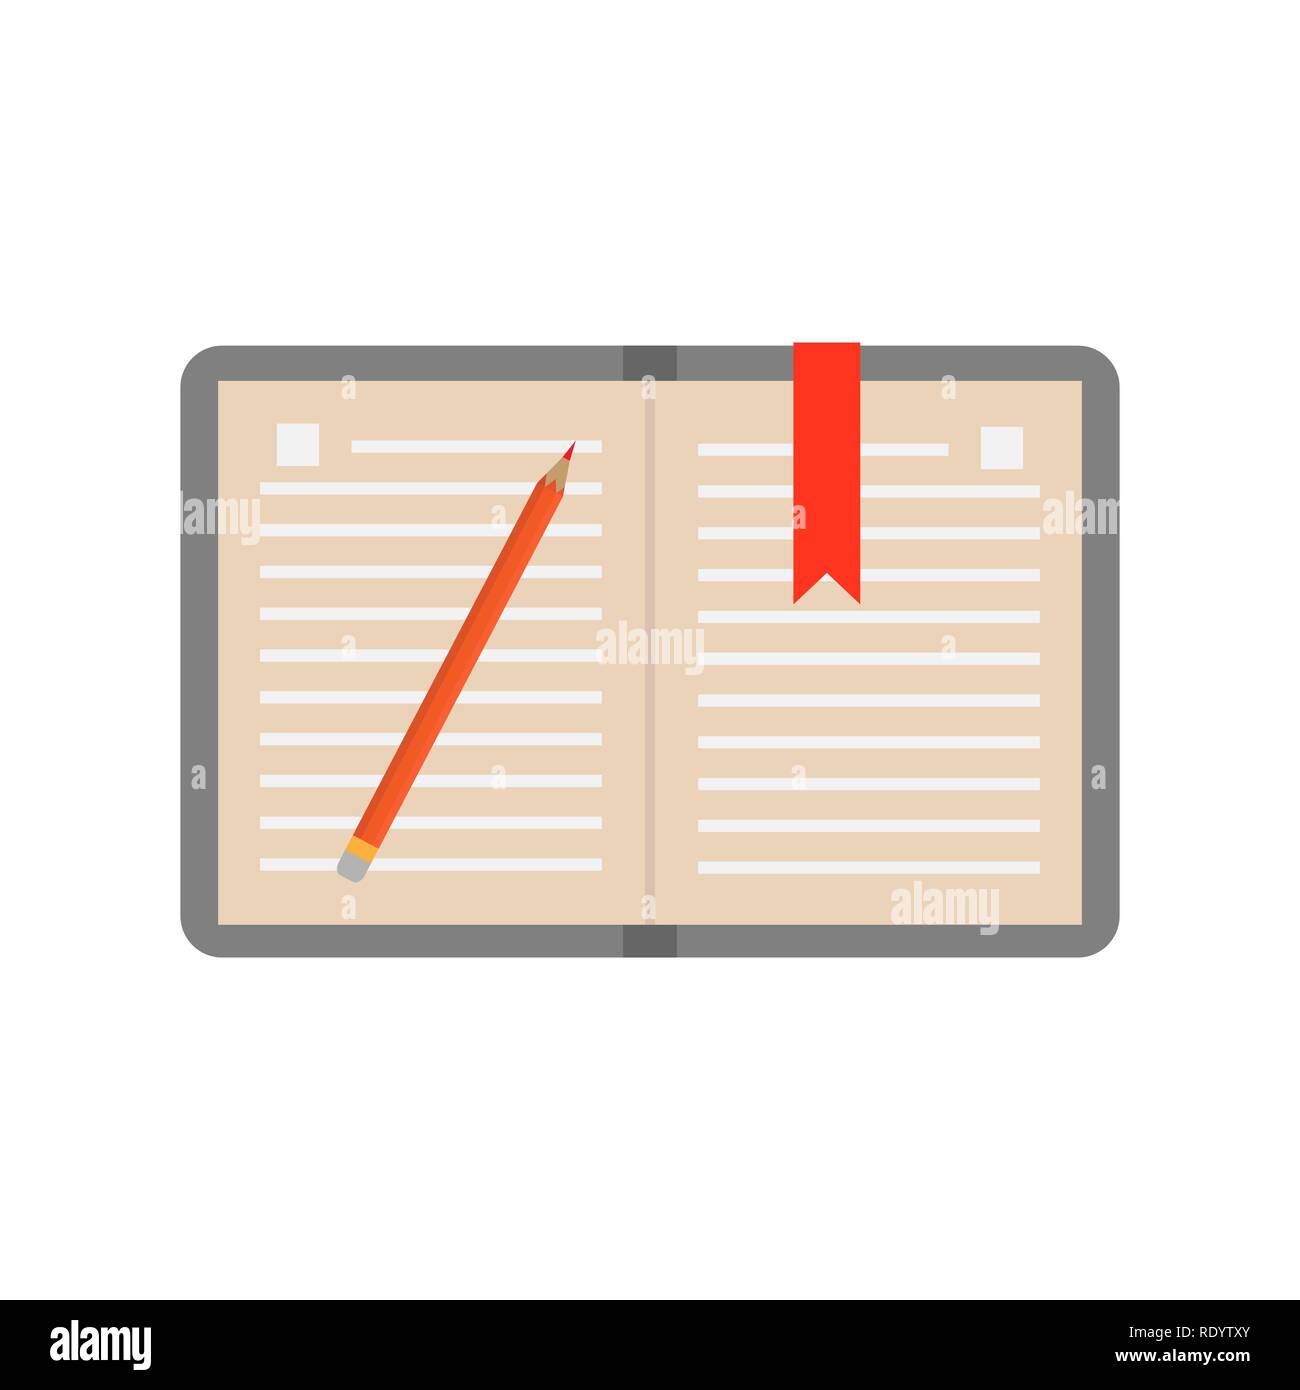 https://c8.alamy.com/comp/RDYTXY/open-notebook-for-writing-with-sheets-in-a-ruler-a-pencil-and-a-ribbon-tab-flat-image-RDYTXY.jpg